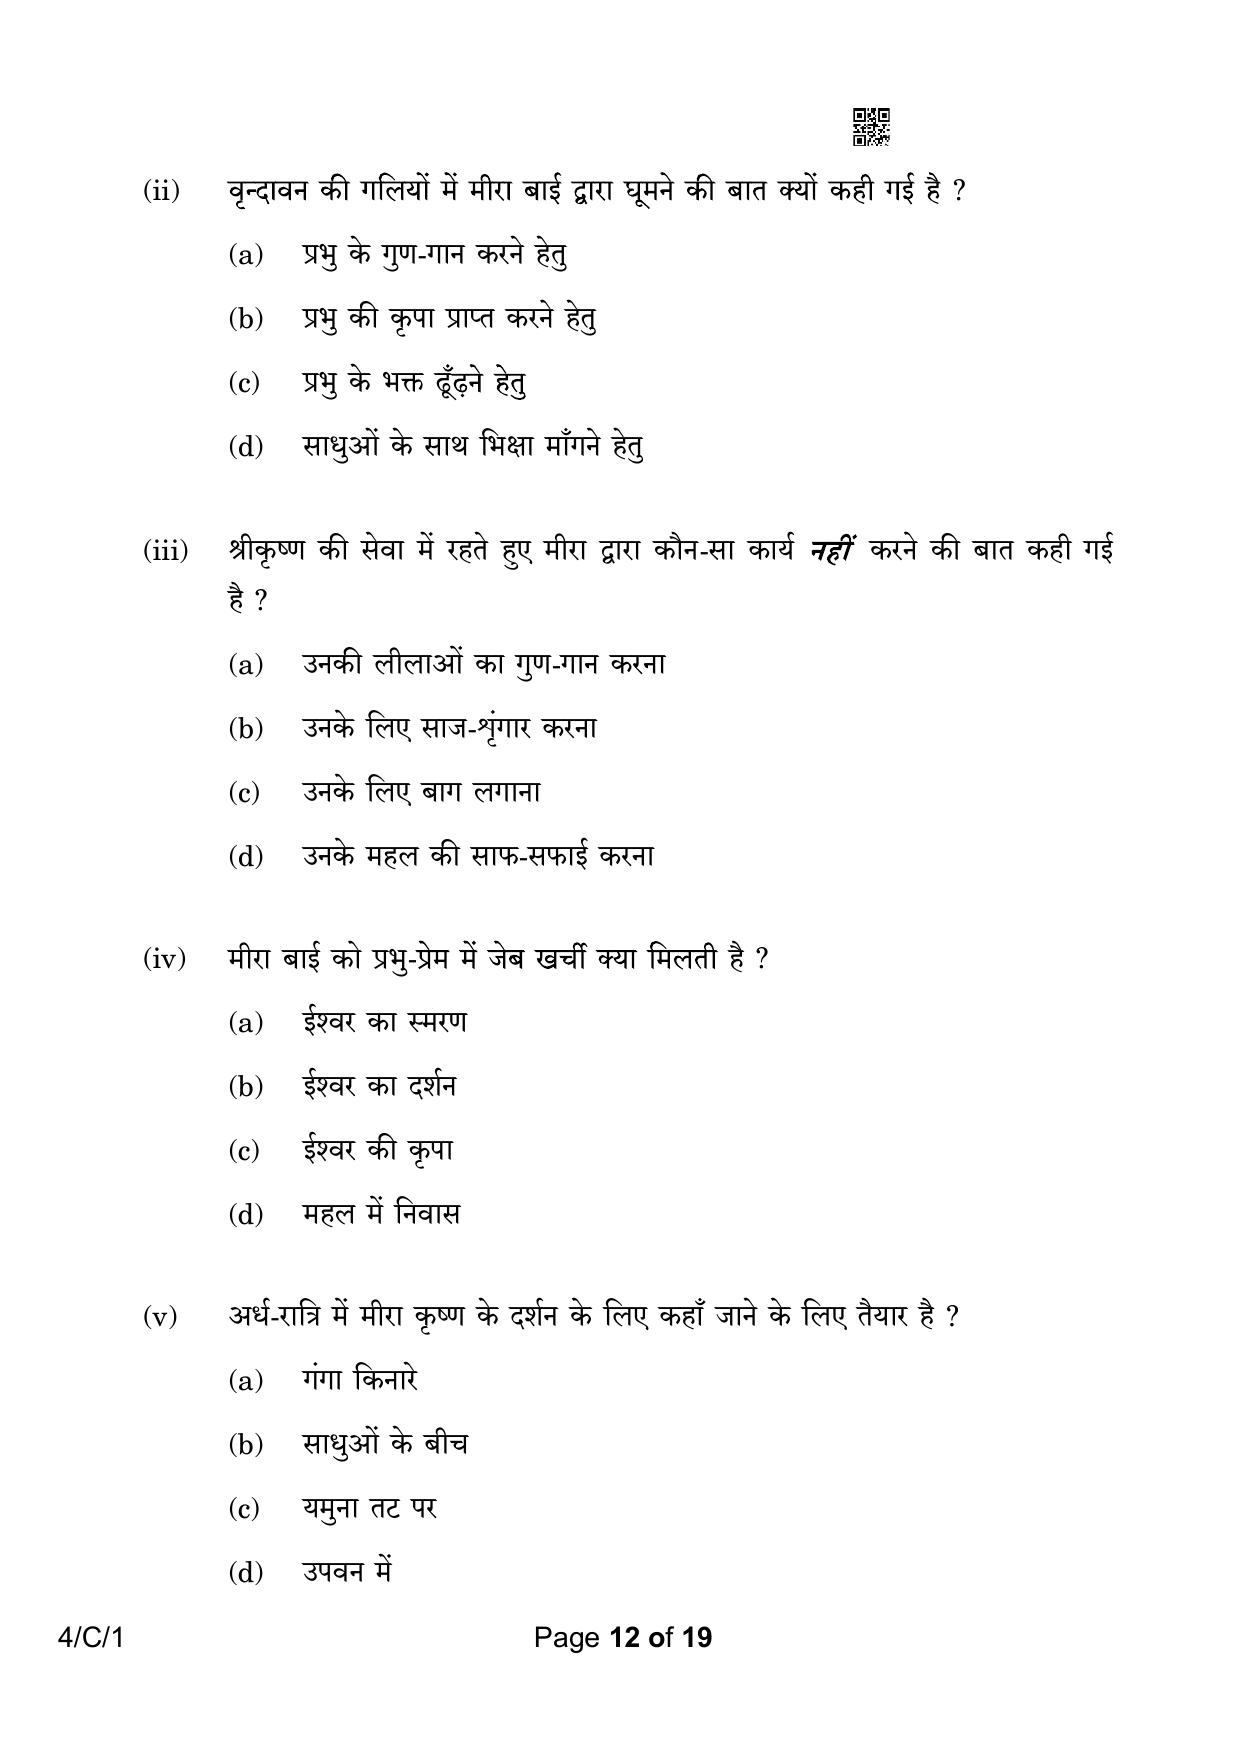 CBSE Class 10 4-1 Hindi B 2023 (Compartment) Question Paper - Page 12